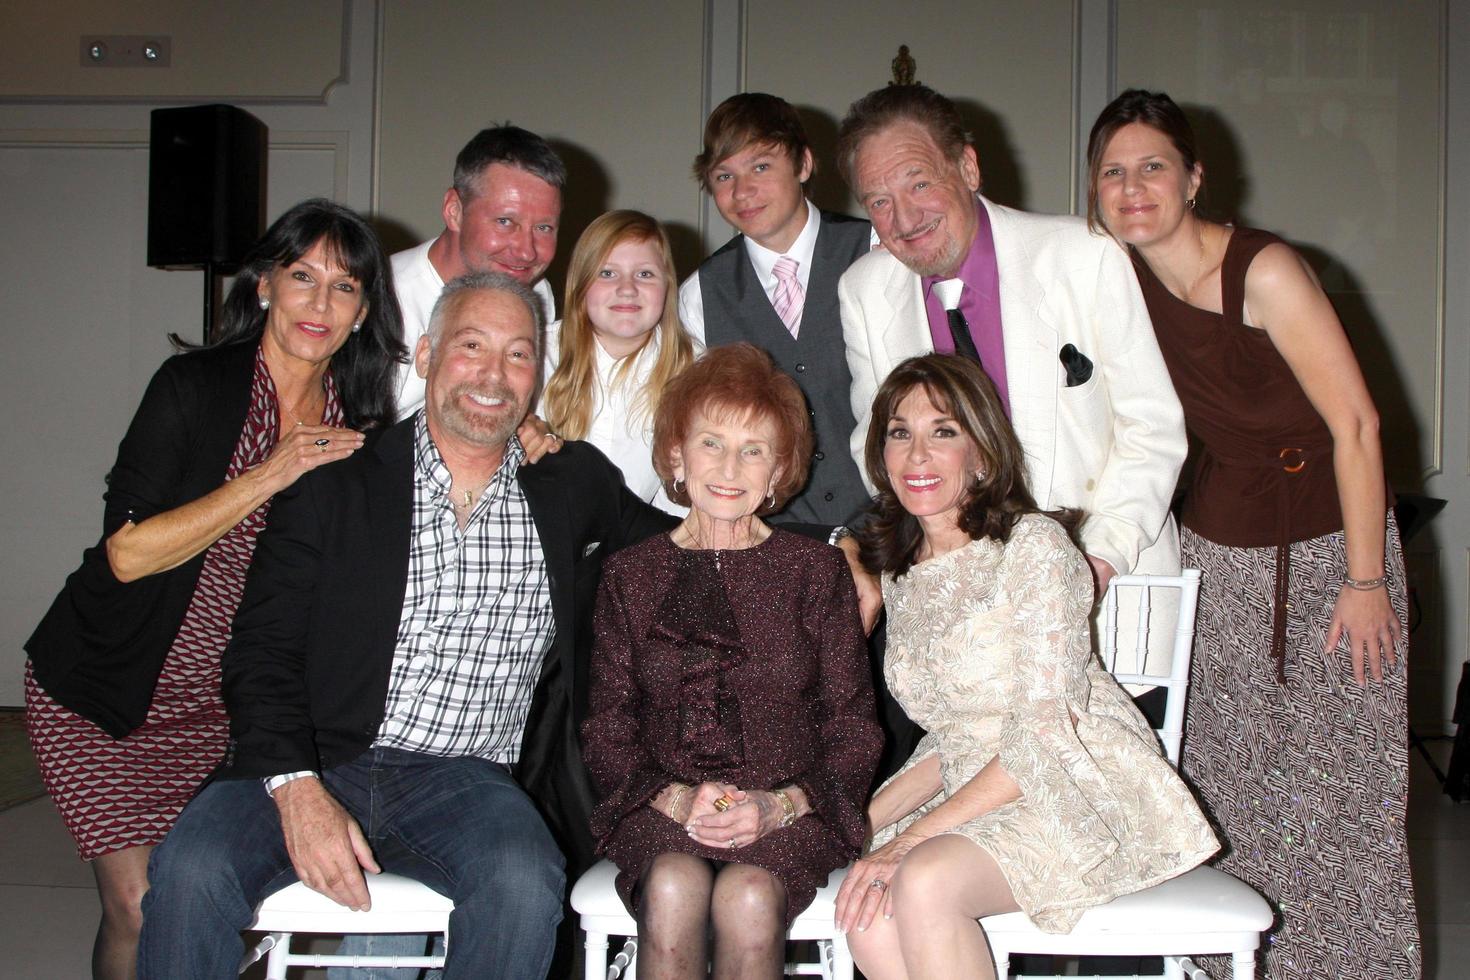 LOS ANGELES, NOV 23 -  at the Molly Wolveck 90th Birthday Party at the Brandview Ballroom on November 23, 2014 in Glendale, CA photo